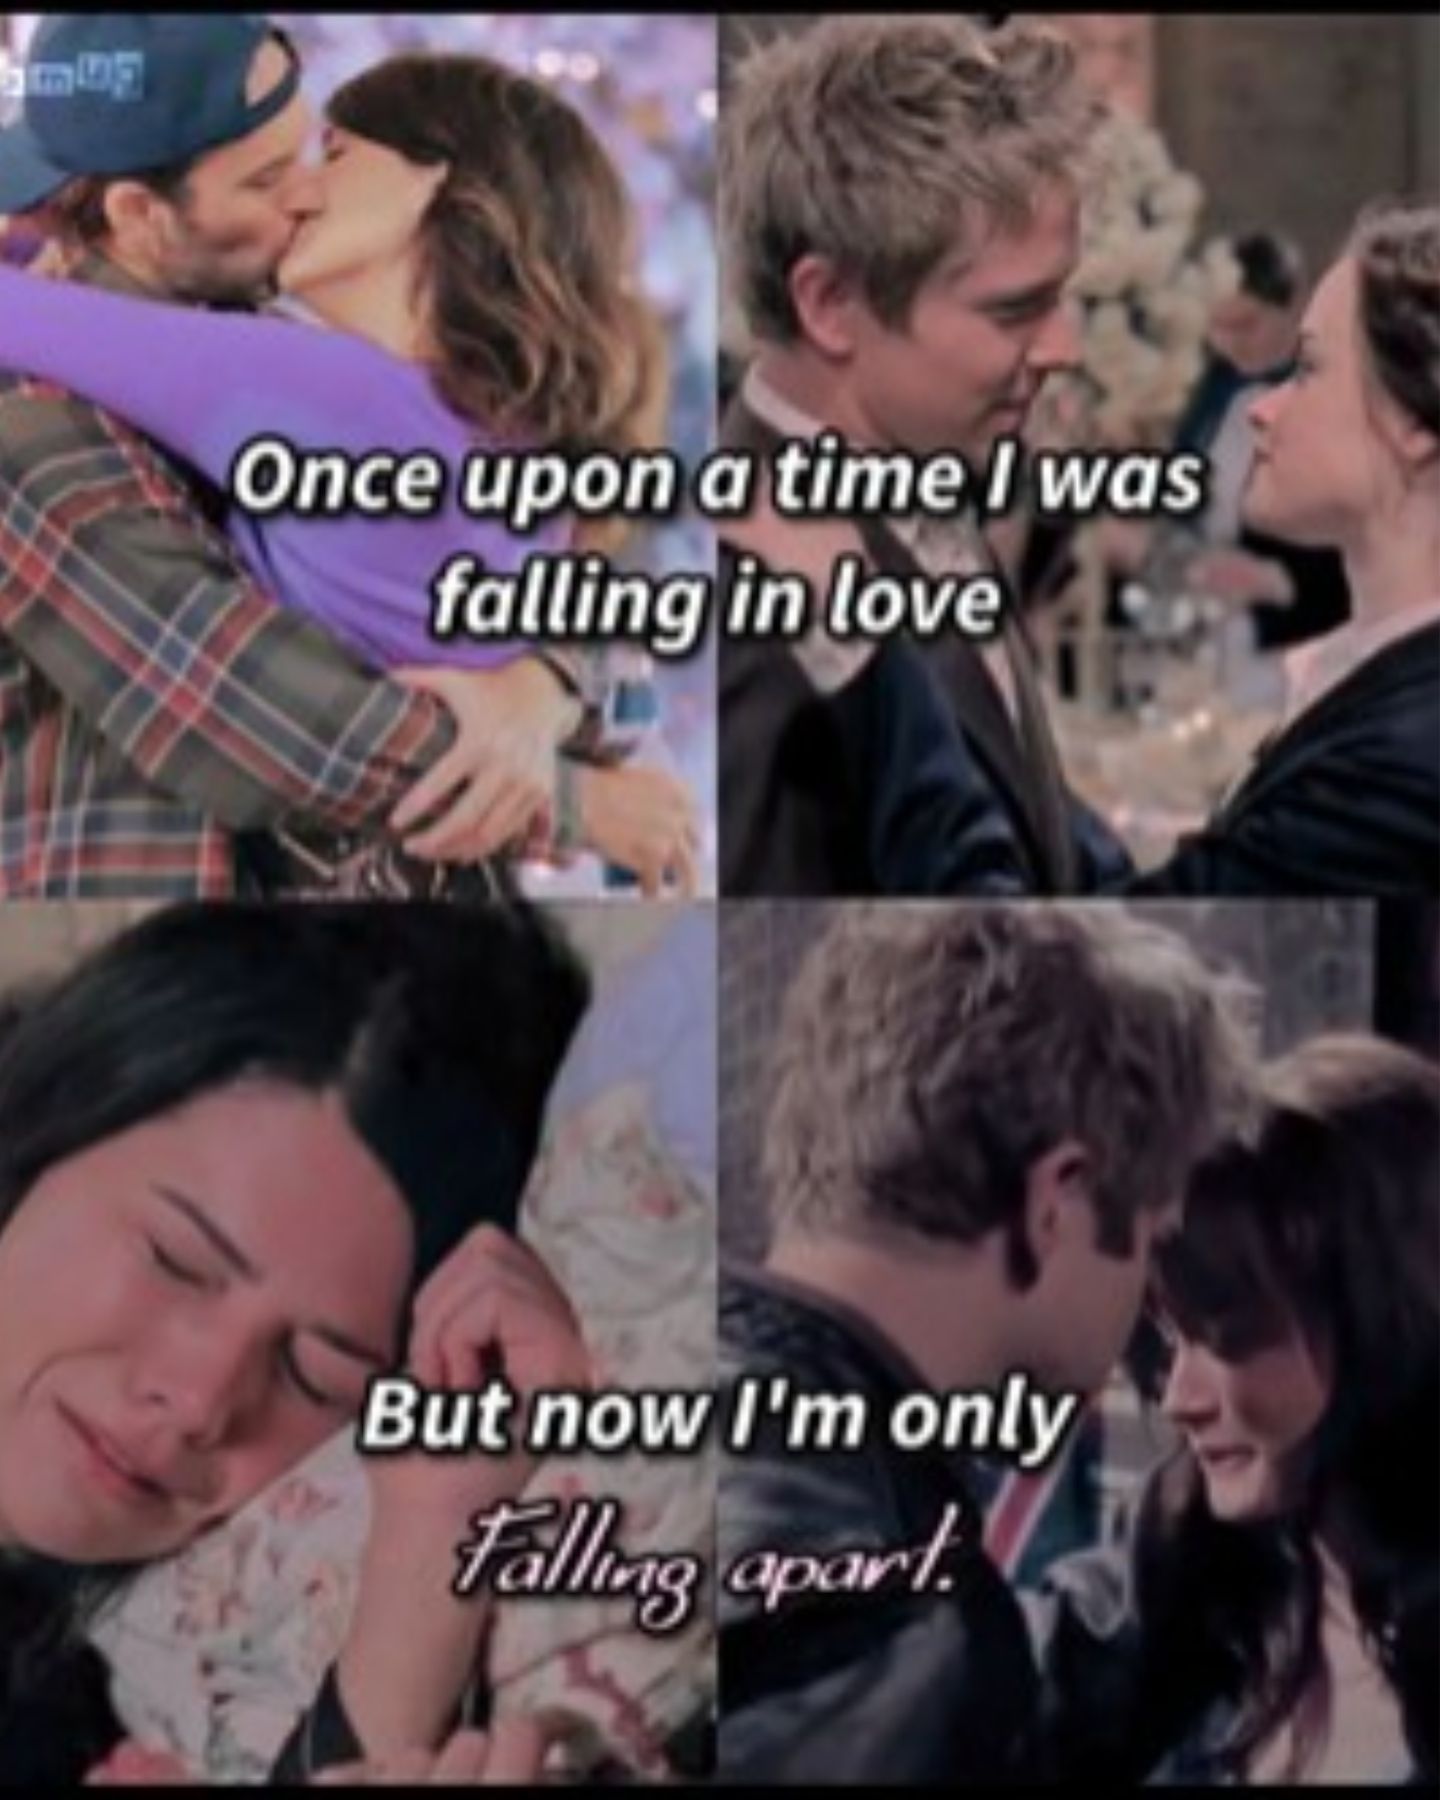 Meme about Lorelei and Rory being heartbroken in Gilmore Girls. 